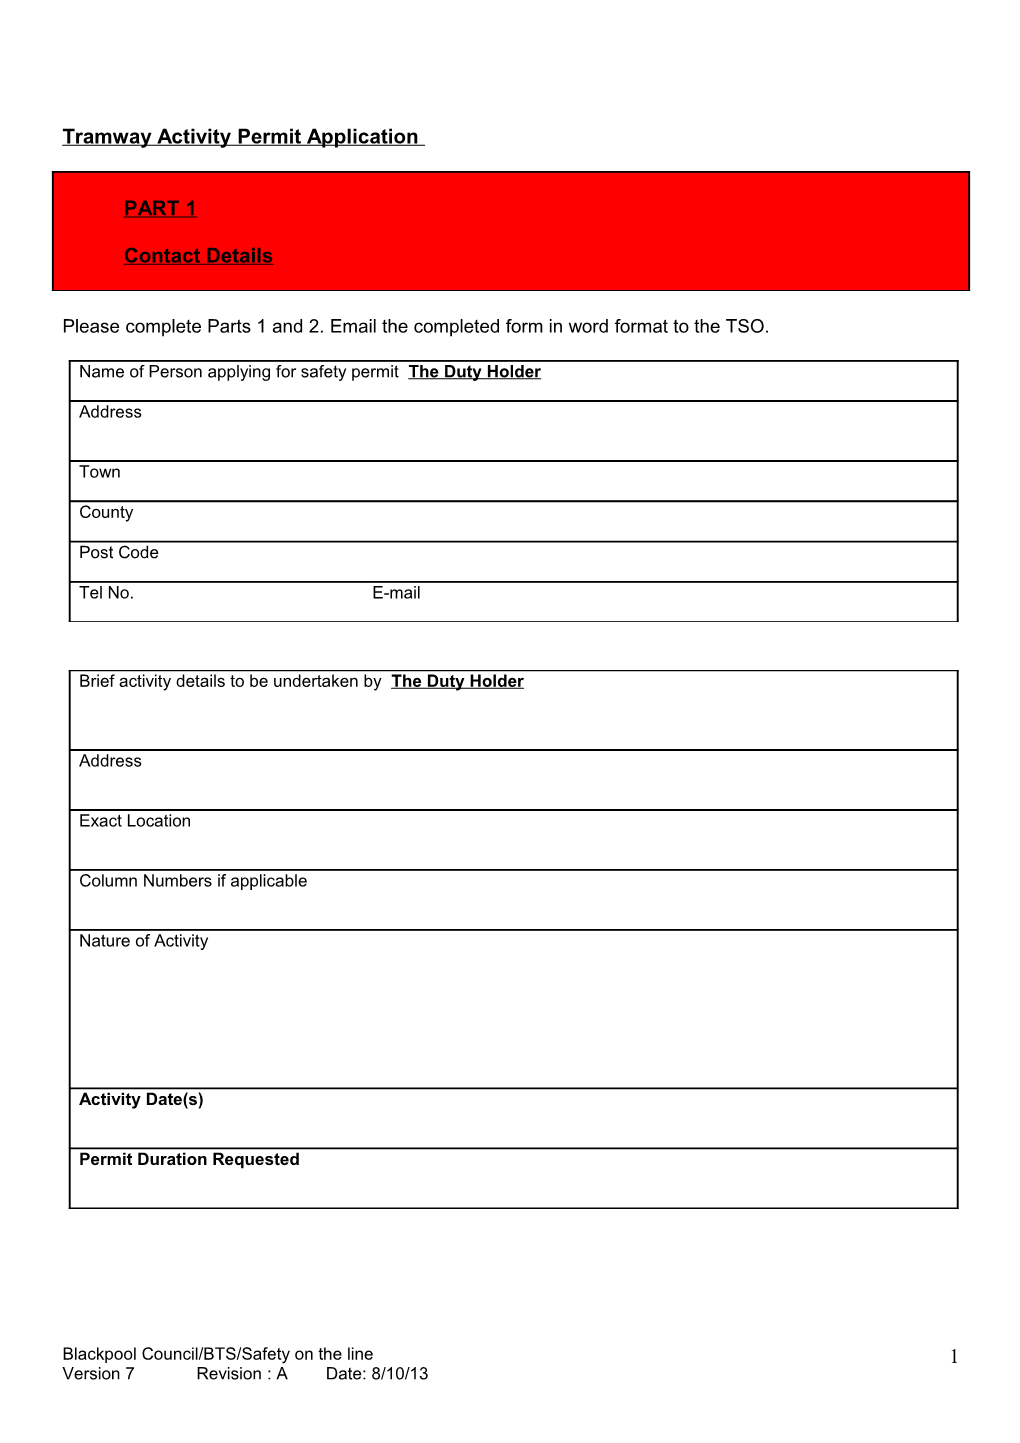 Tramway Activity Permit Application